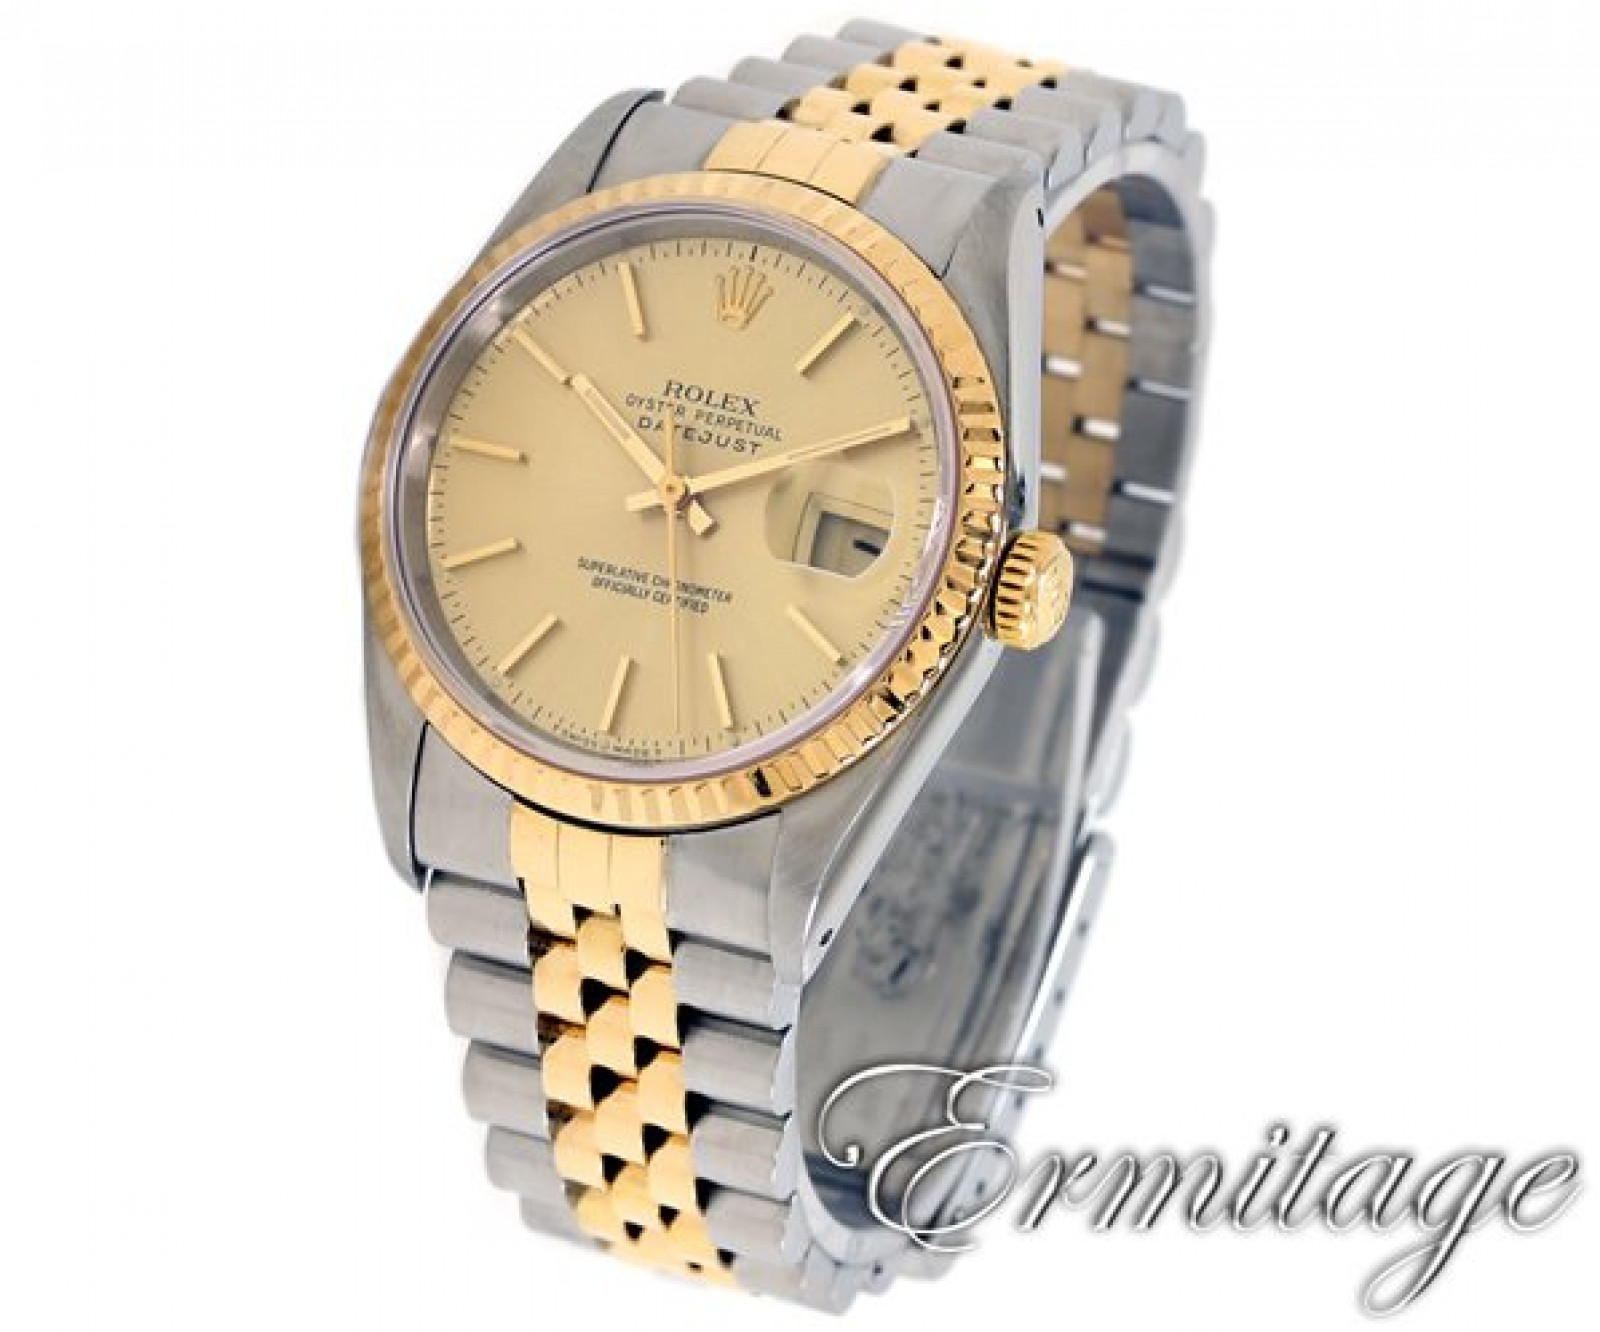 Sell Rolex Datejust 16233 for Top Price